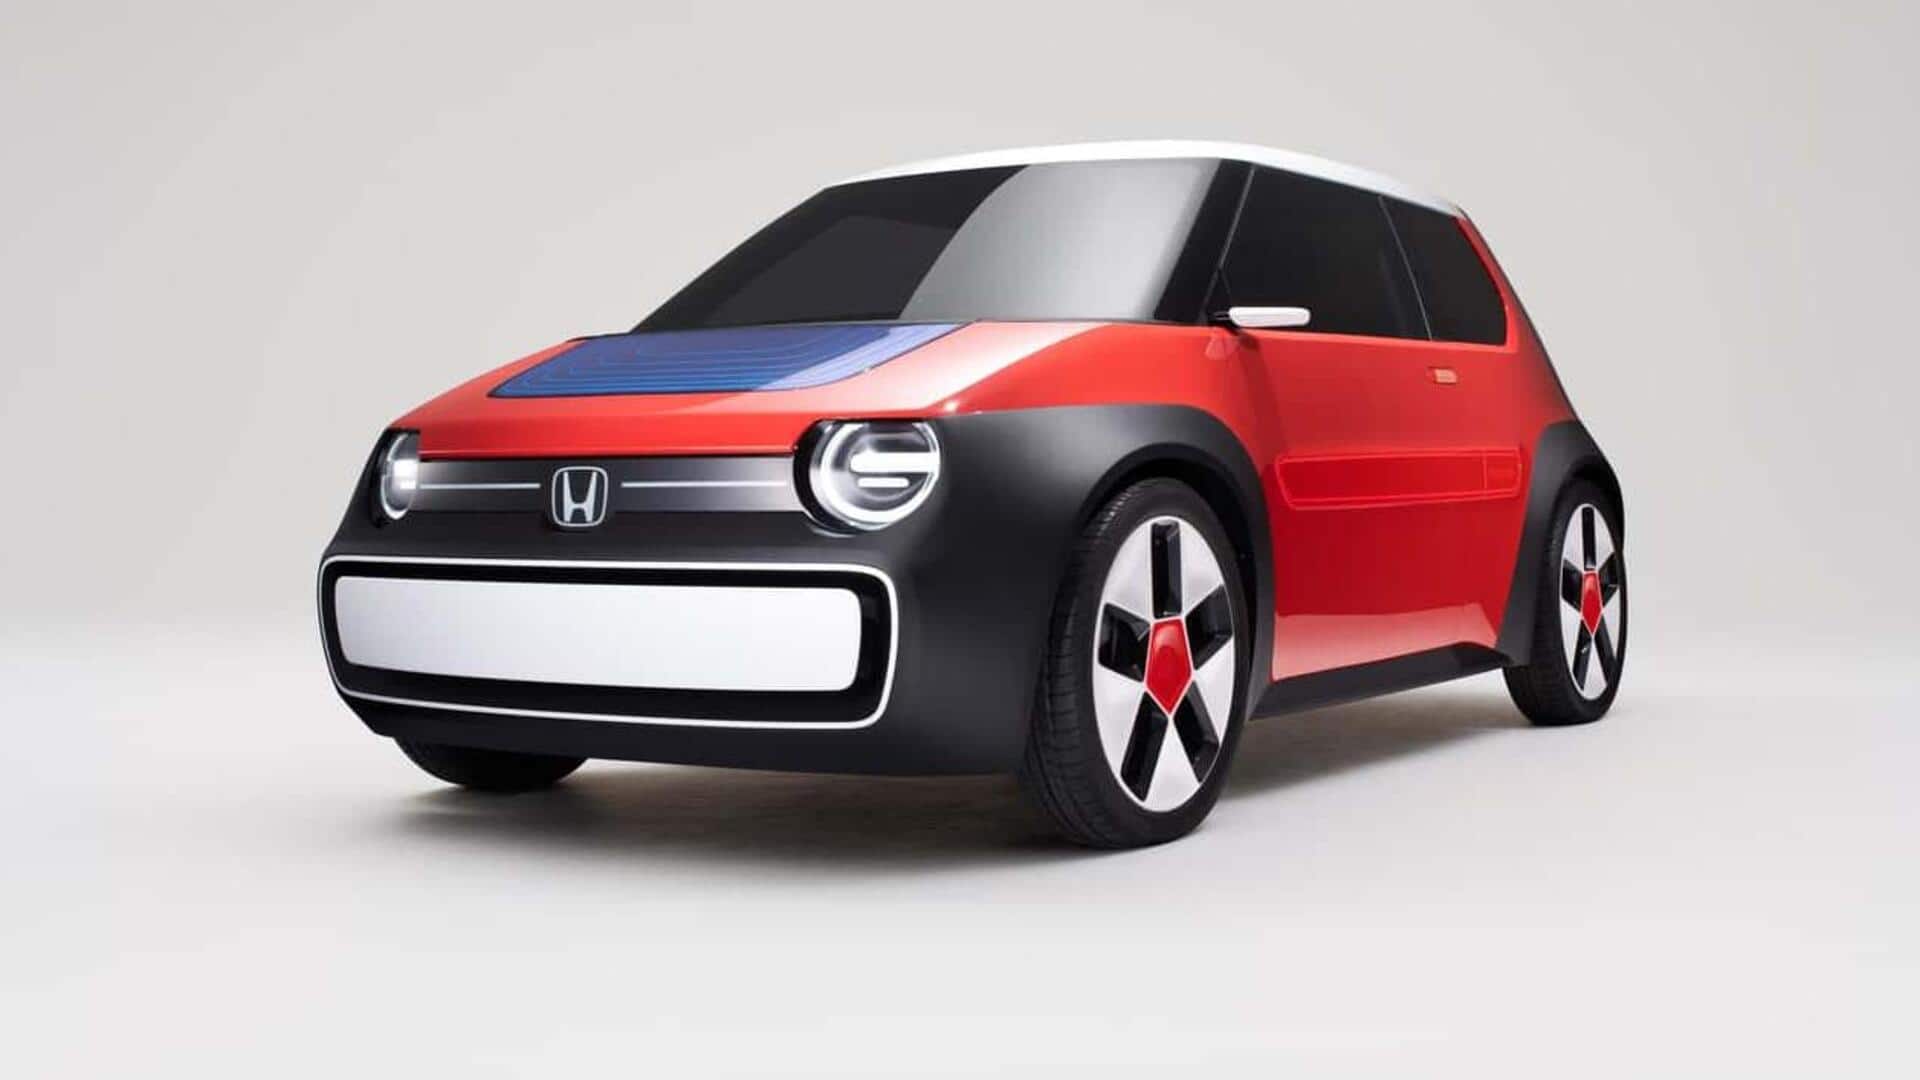 Honda to reveal multiple EV concepts at Tokyo Motor Show